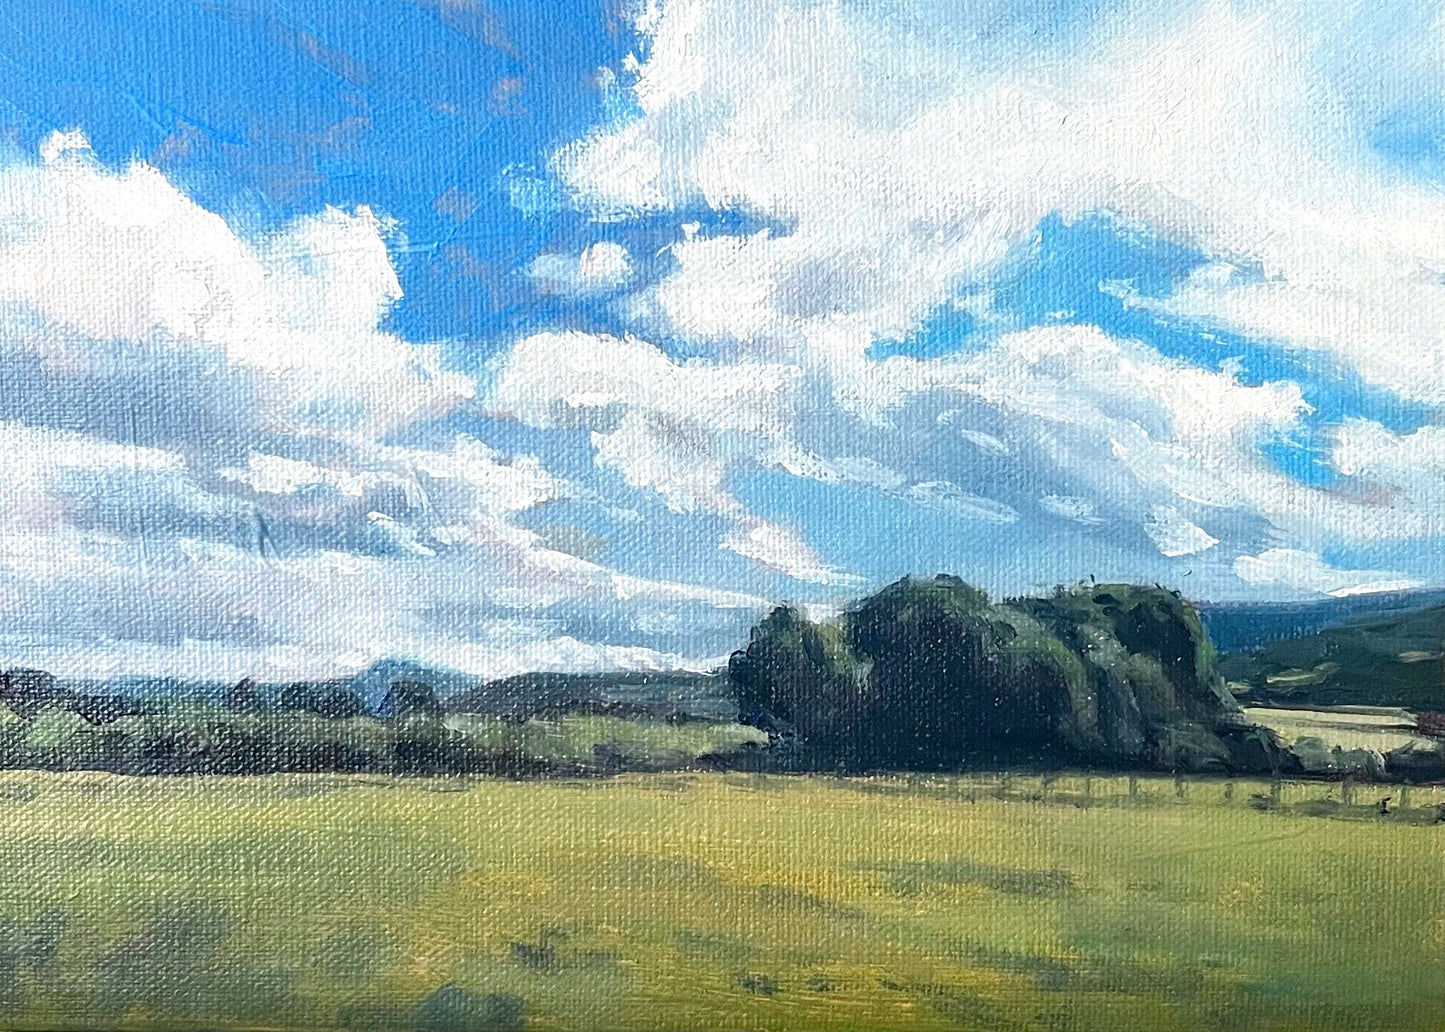 “In the Clouds”- 5x7” oil on linen panel